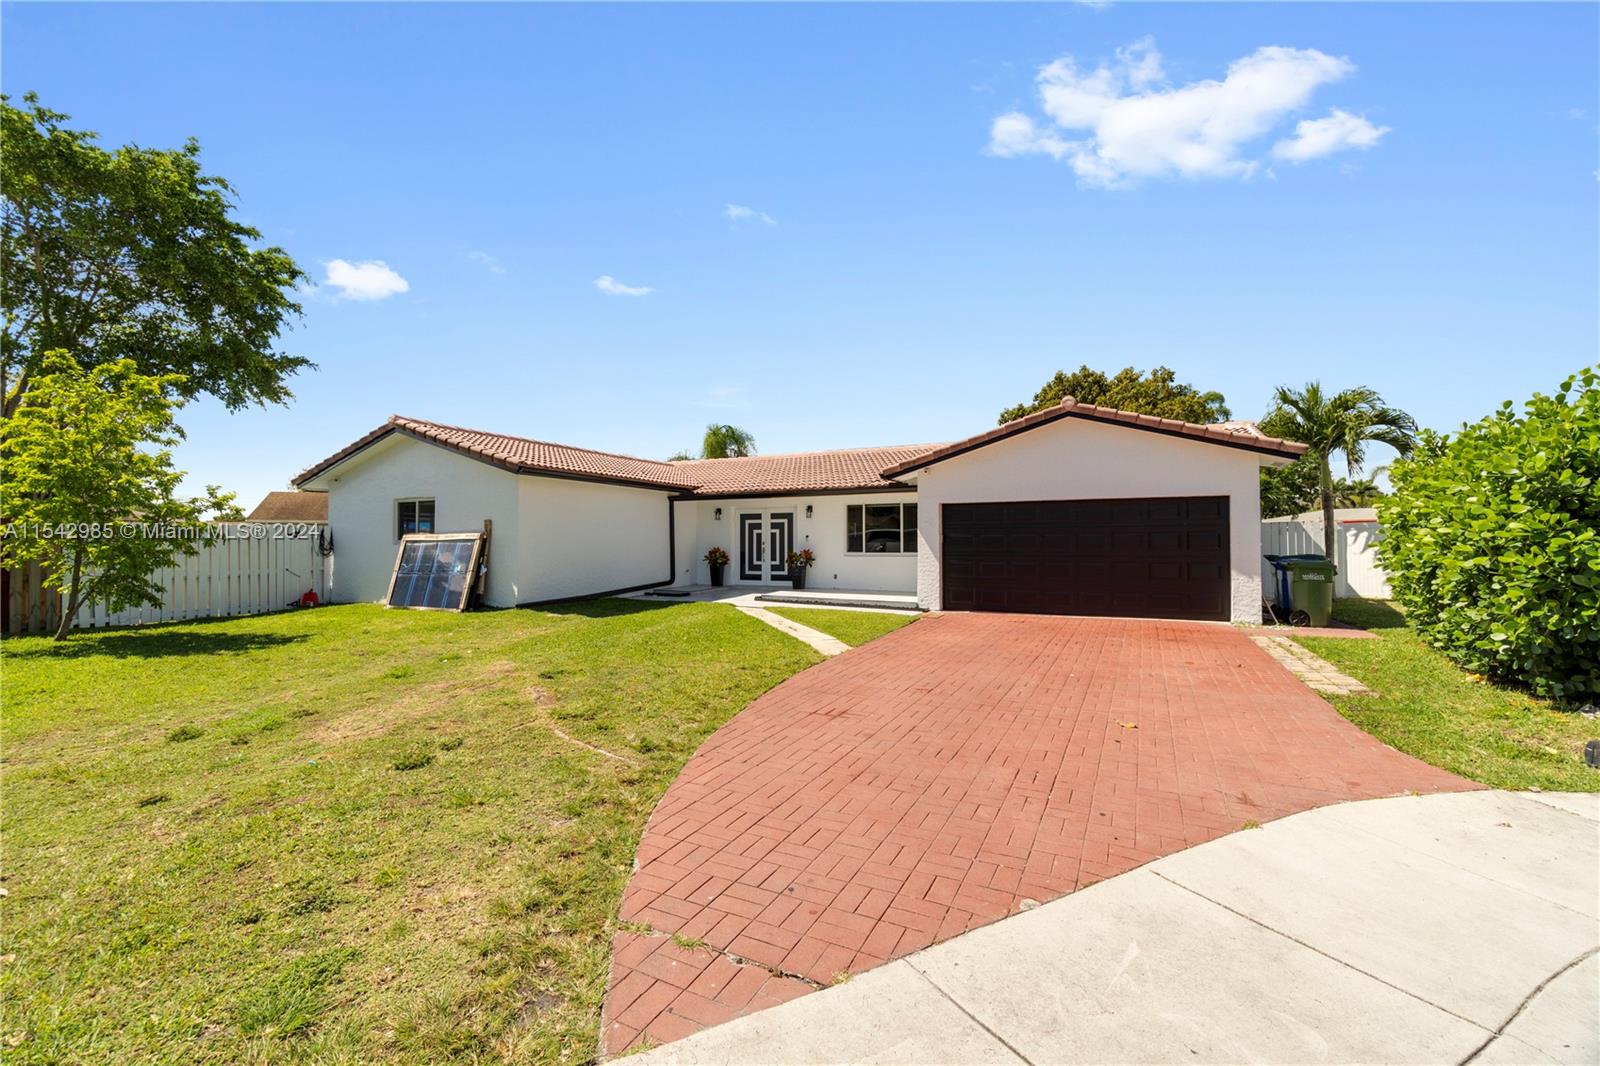 1501 NW 64th Ave, Margate, Florida 33063, 4 Bedrooms Bedrooms, ,2 BathroomsBathrooms,Residential,For Sale,1501 NW 64th Ave,A11542985